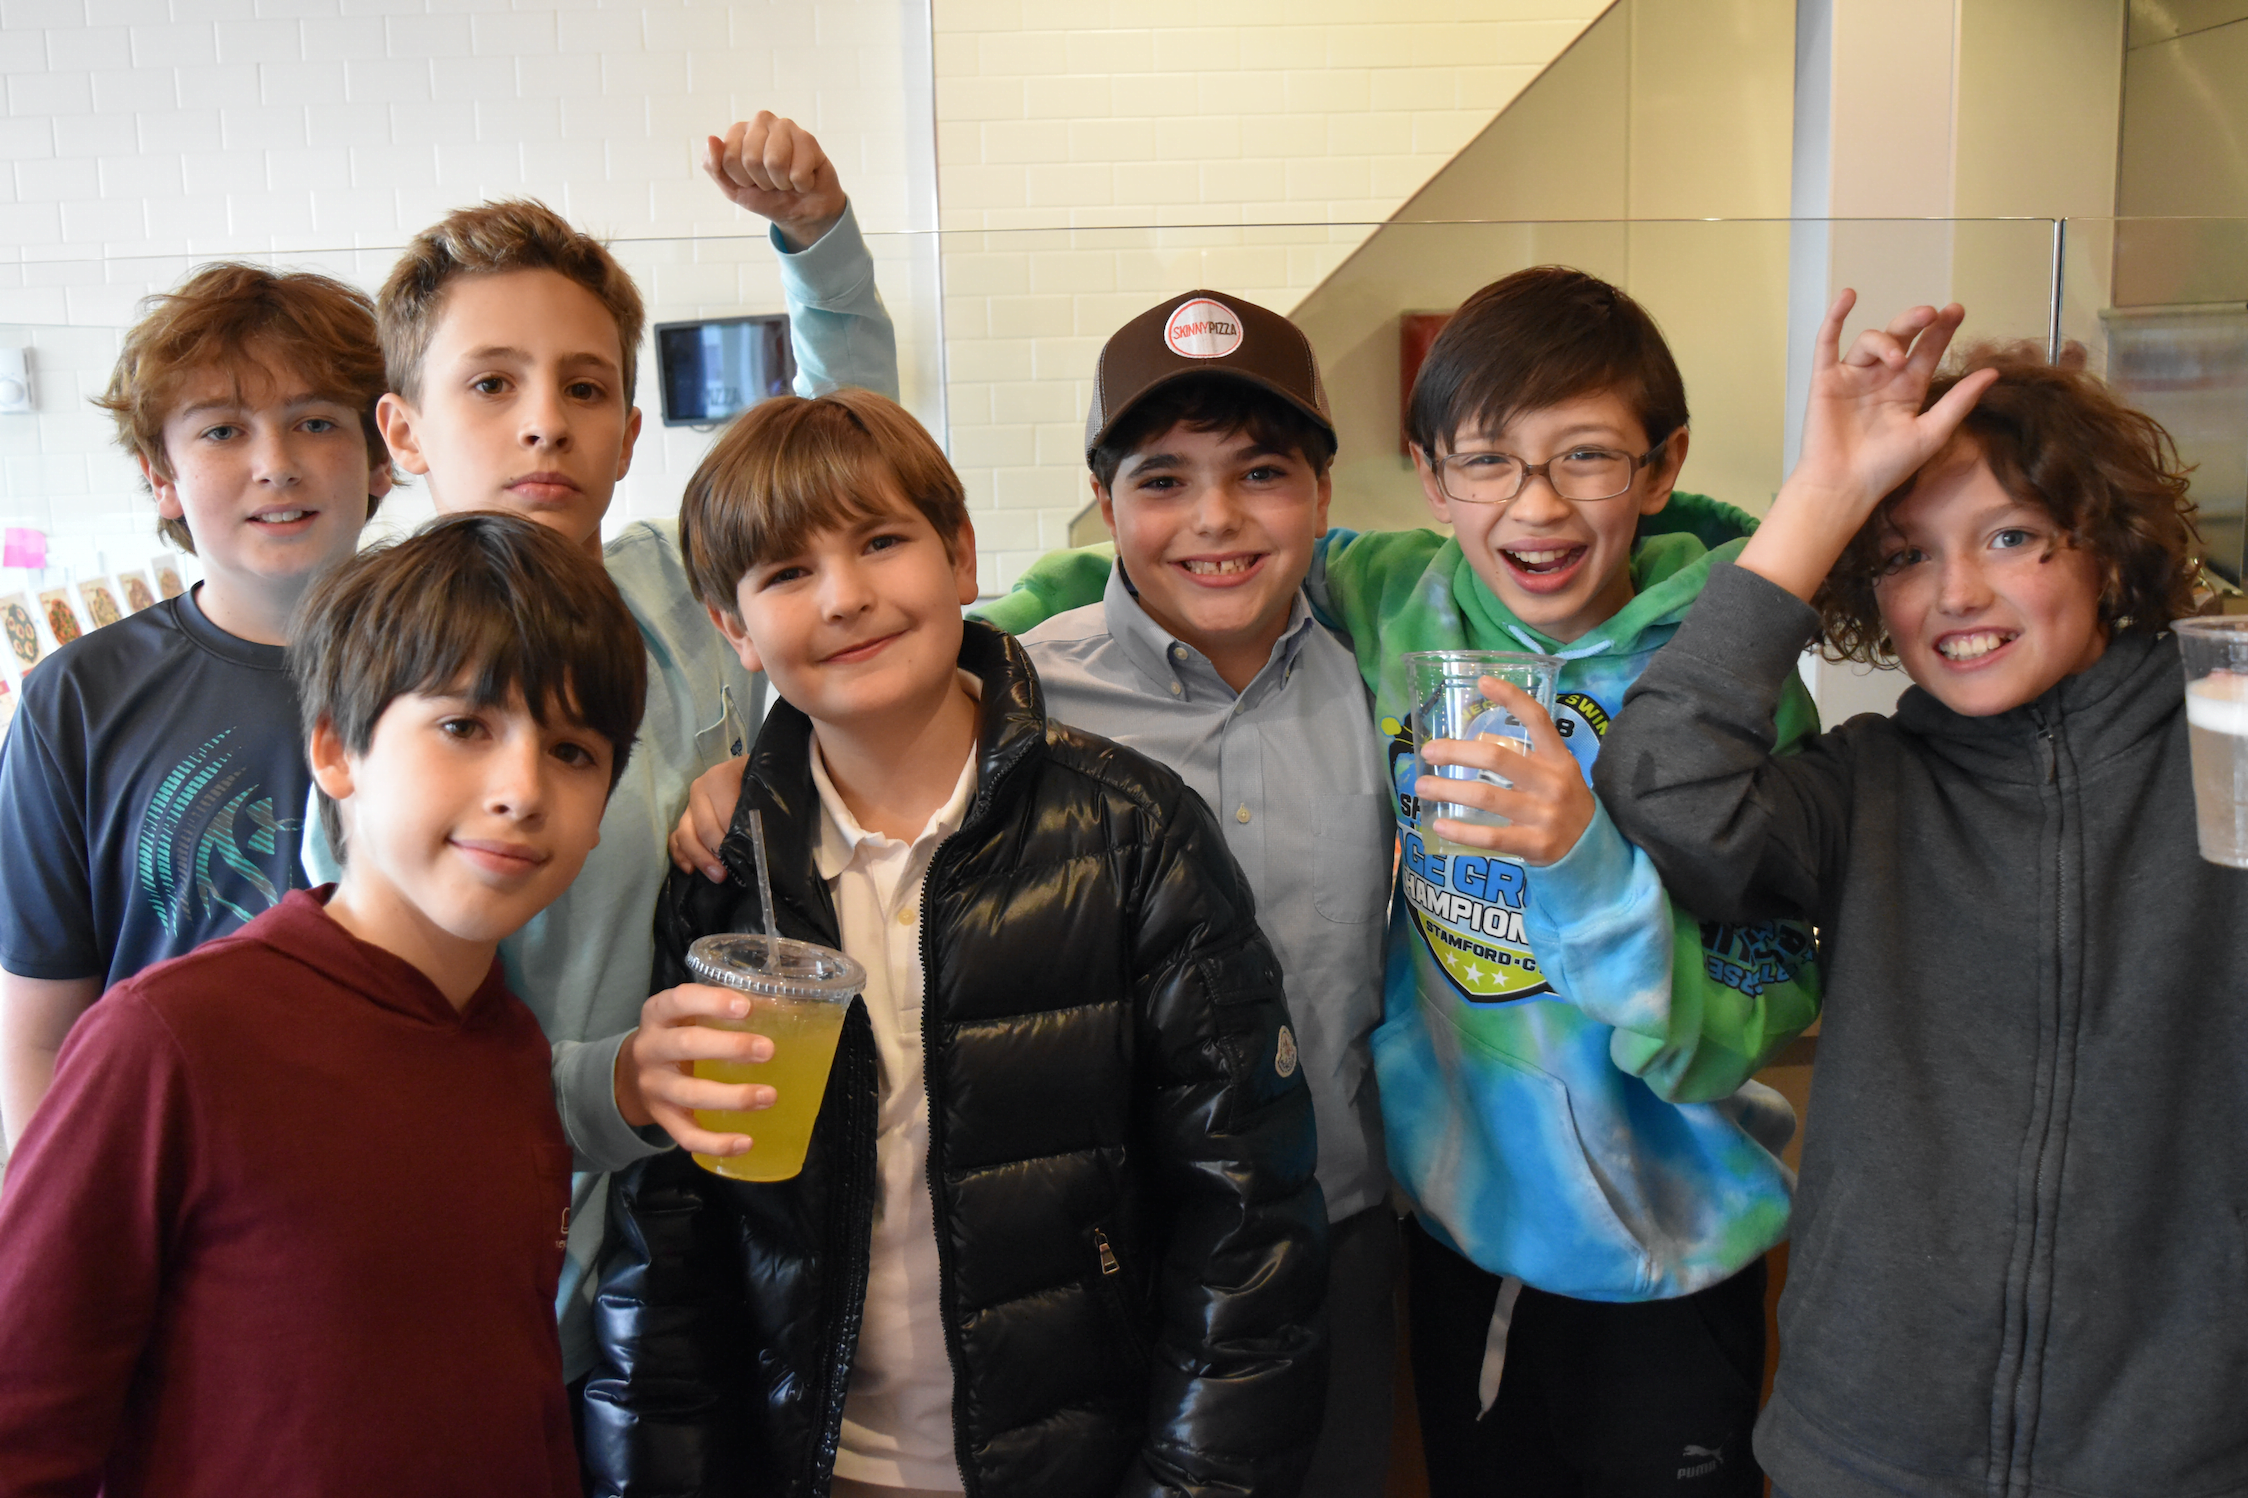 Anthony Bouboulis, a 5th grader at Parkway school, hosted a pizza party for his 5th grade friends at his parents' new Skinny Pizza restaurant on Greenwich Avenue. April 4, 2018 Photo Heather Brown